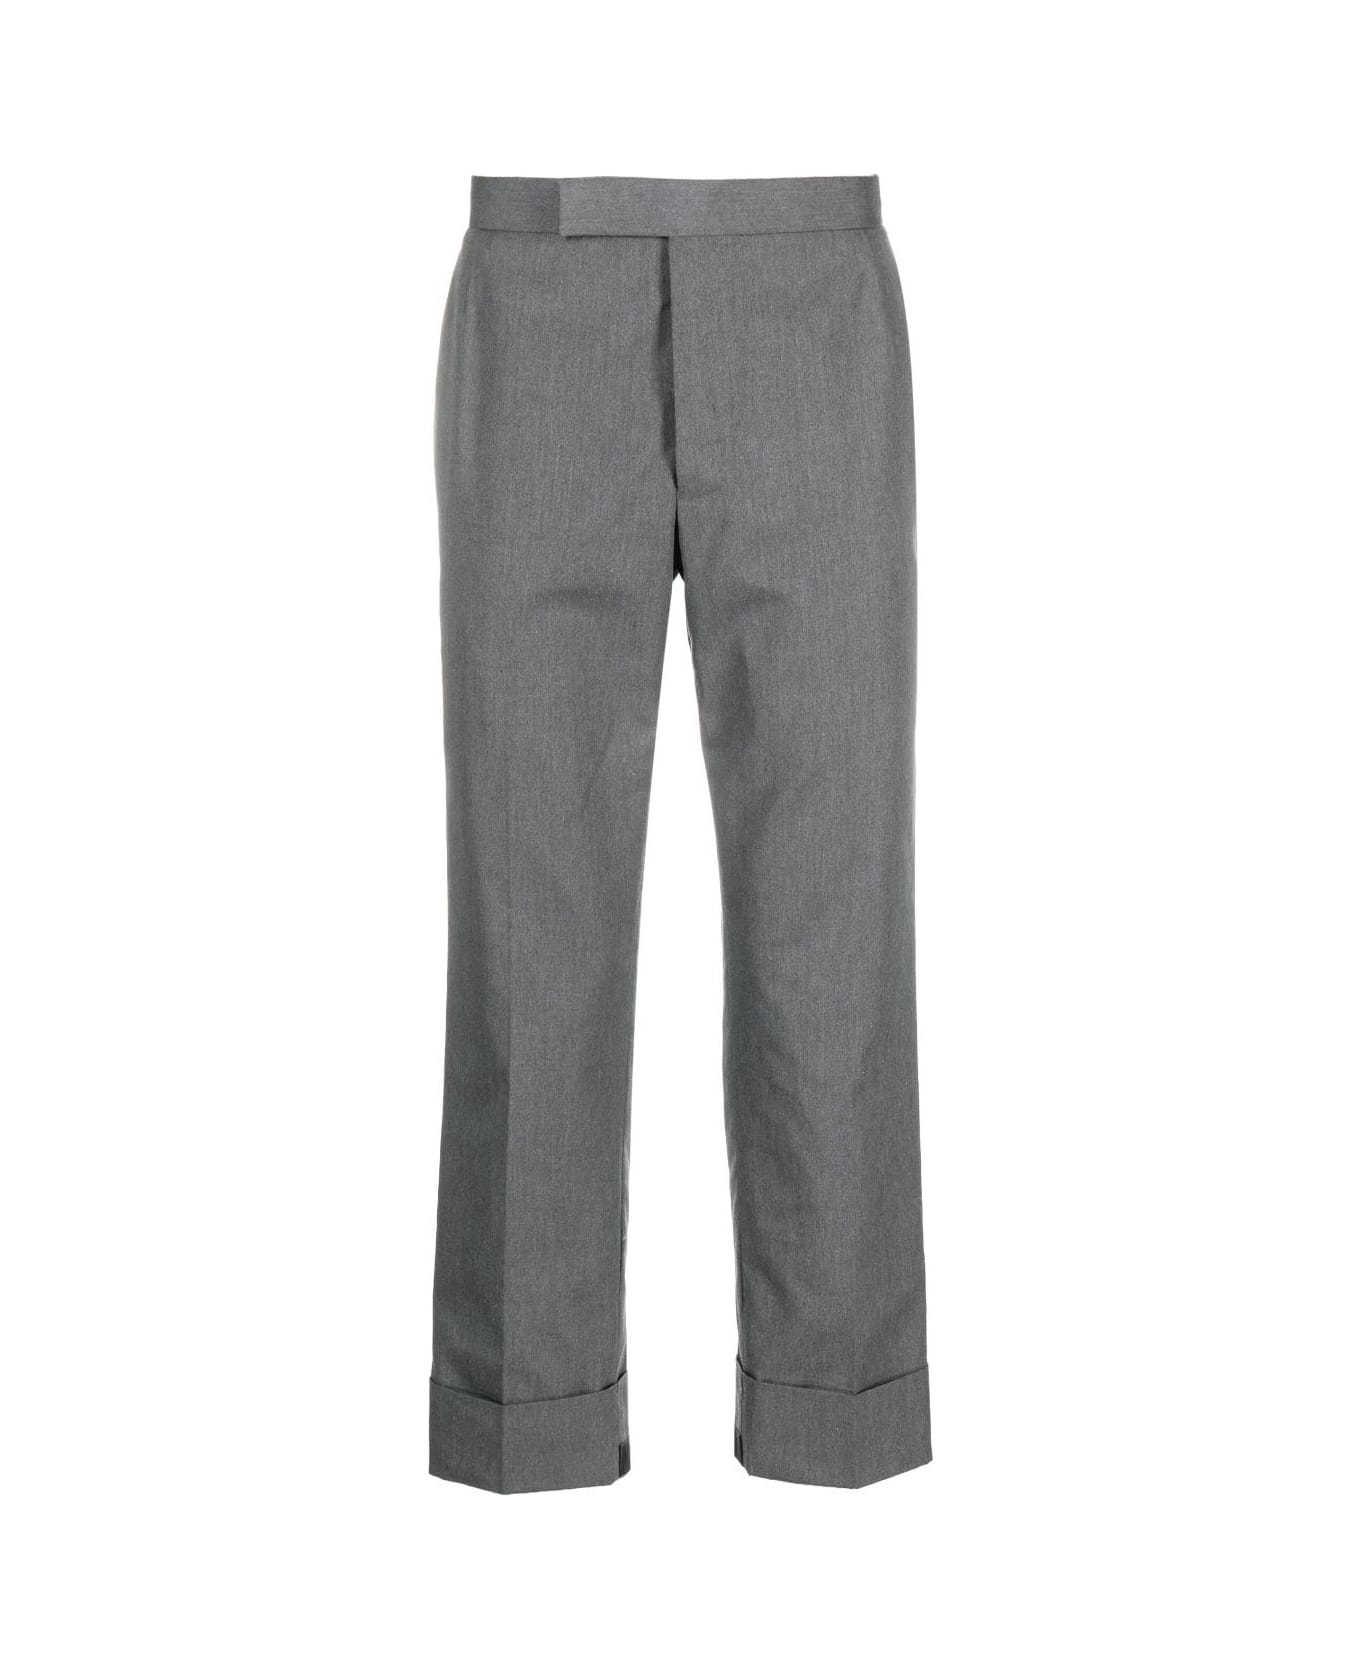 Thom Browne Fit 1 Gg Backstrap Trouser In Typewriter Cloth - Med Grey